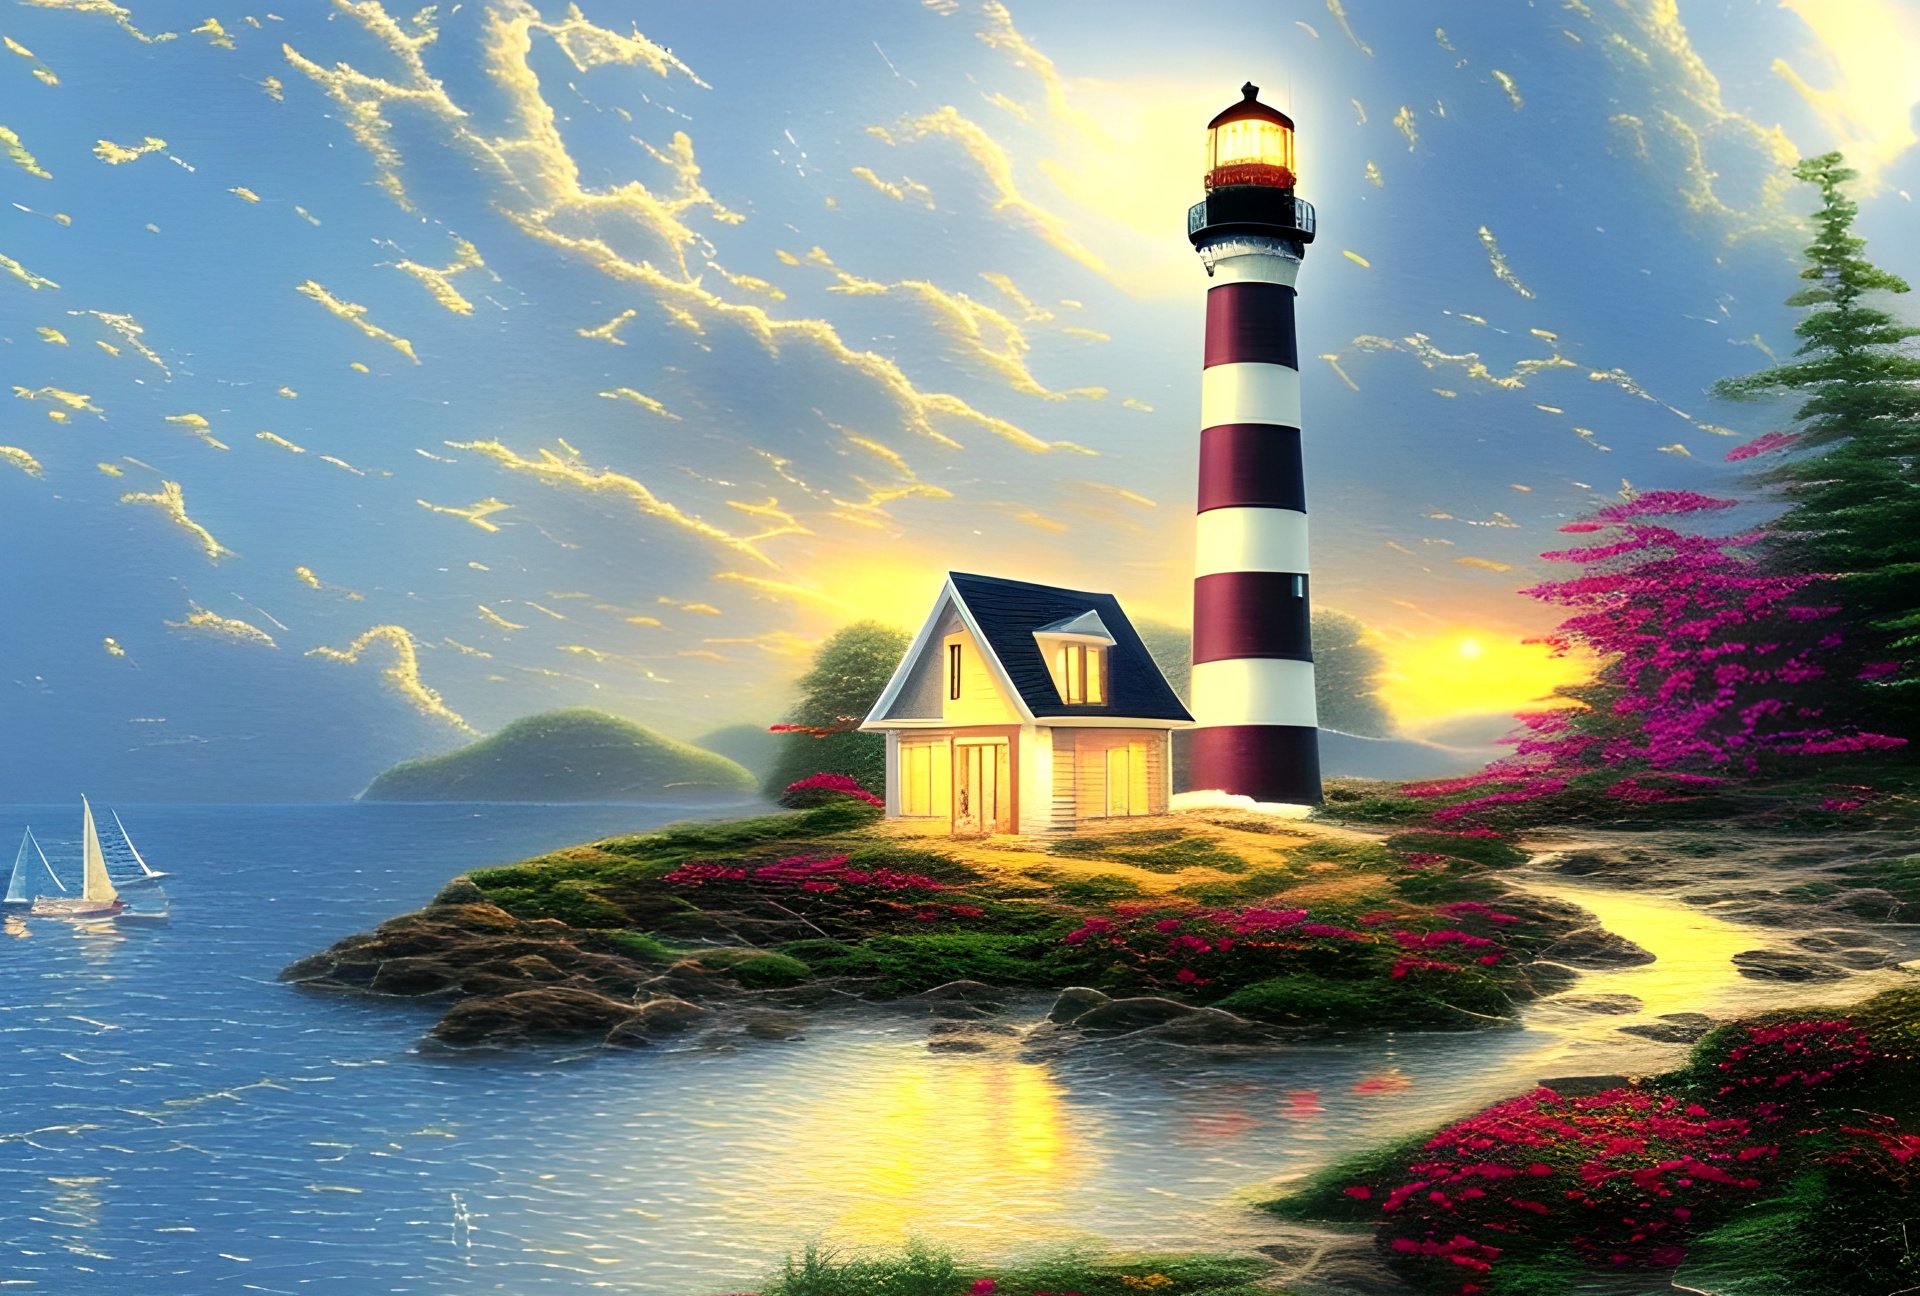 Lighthouse At Night Time 301